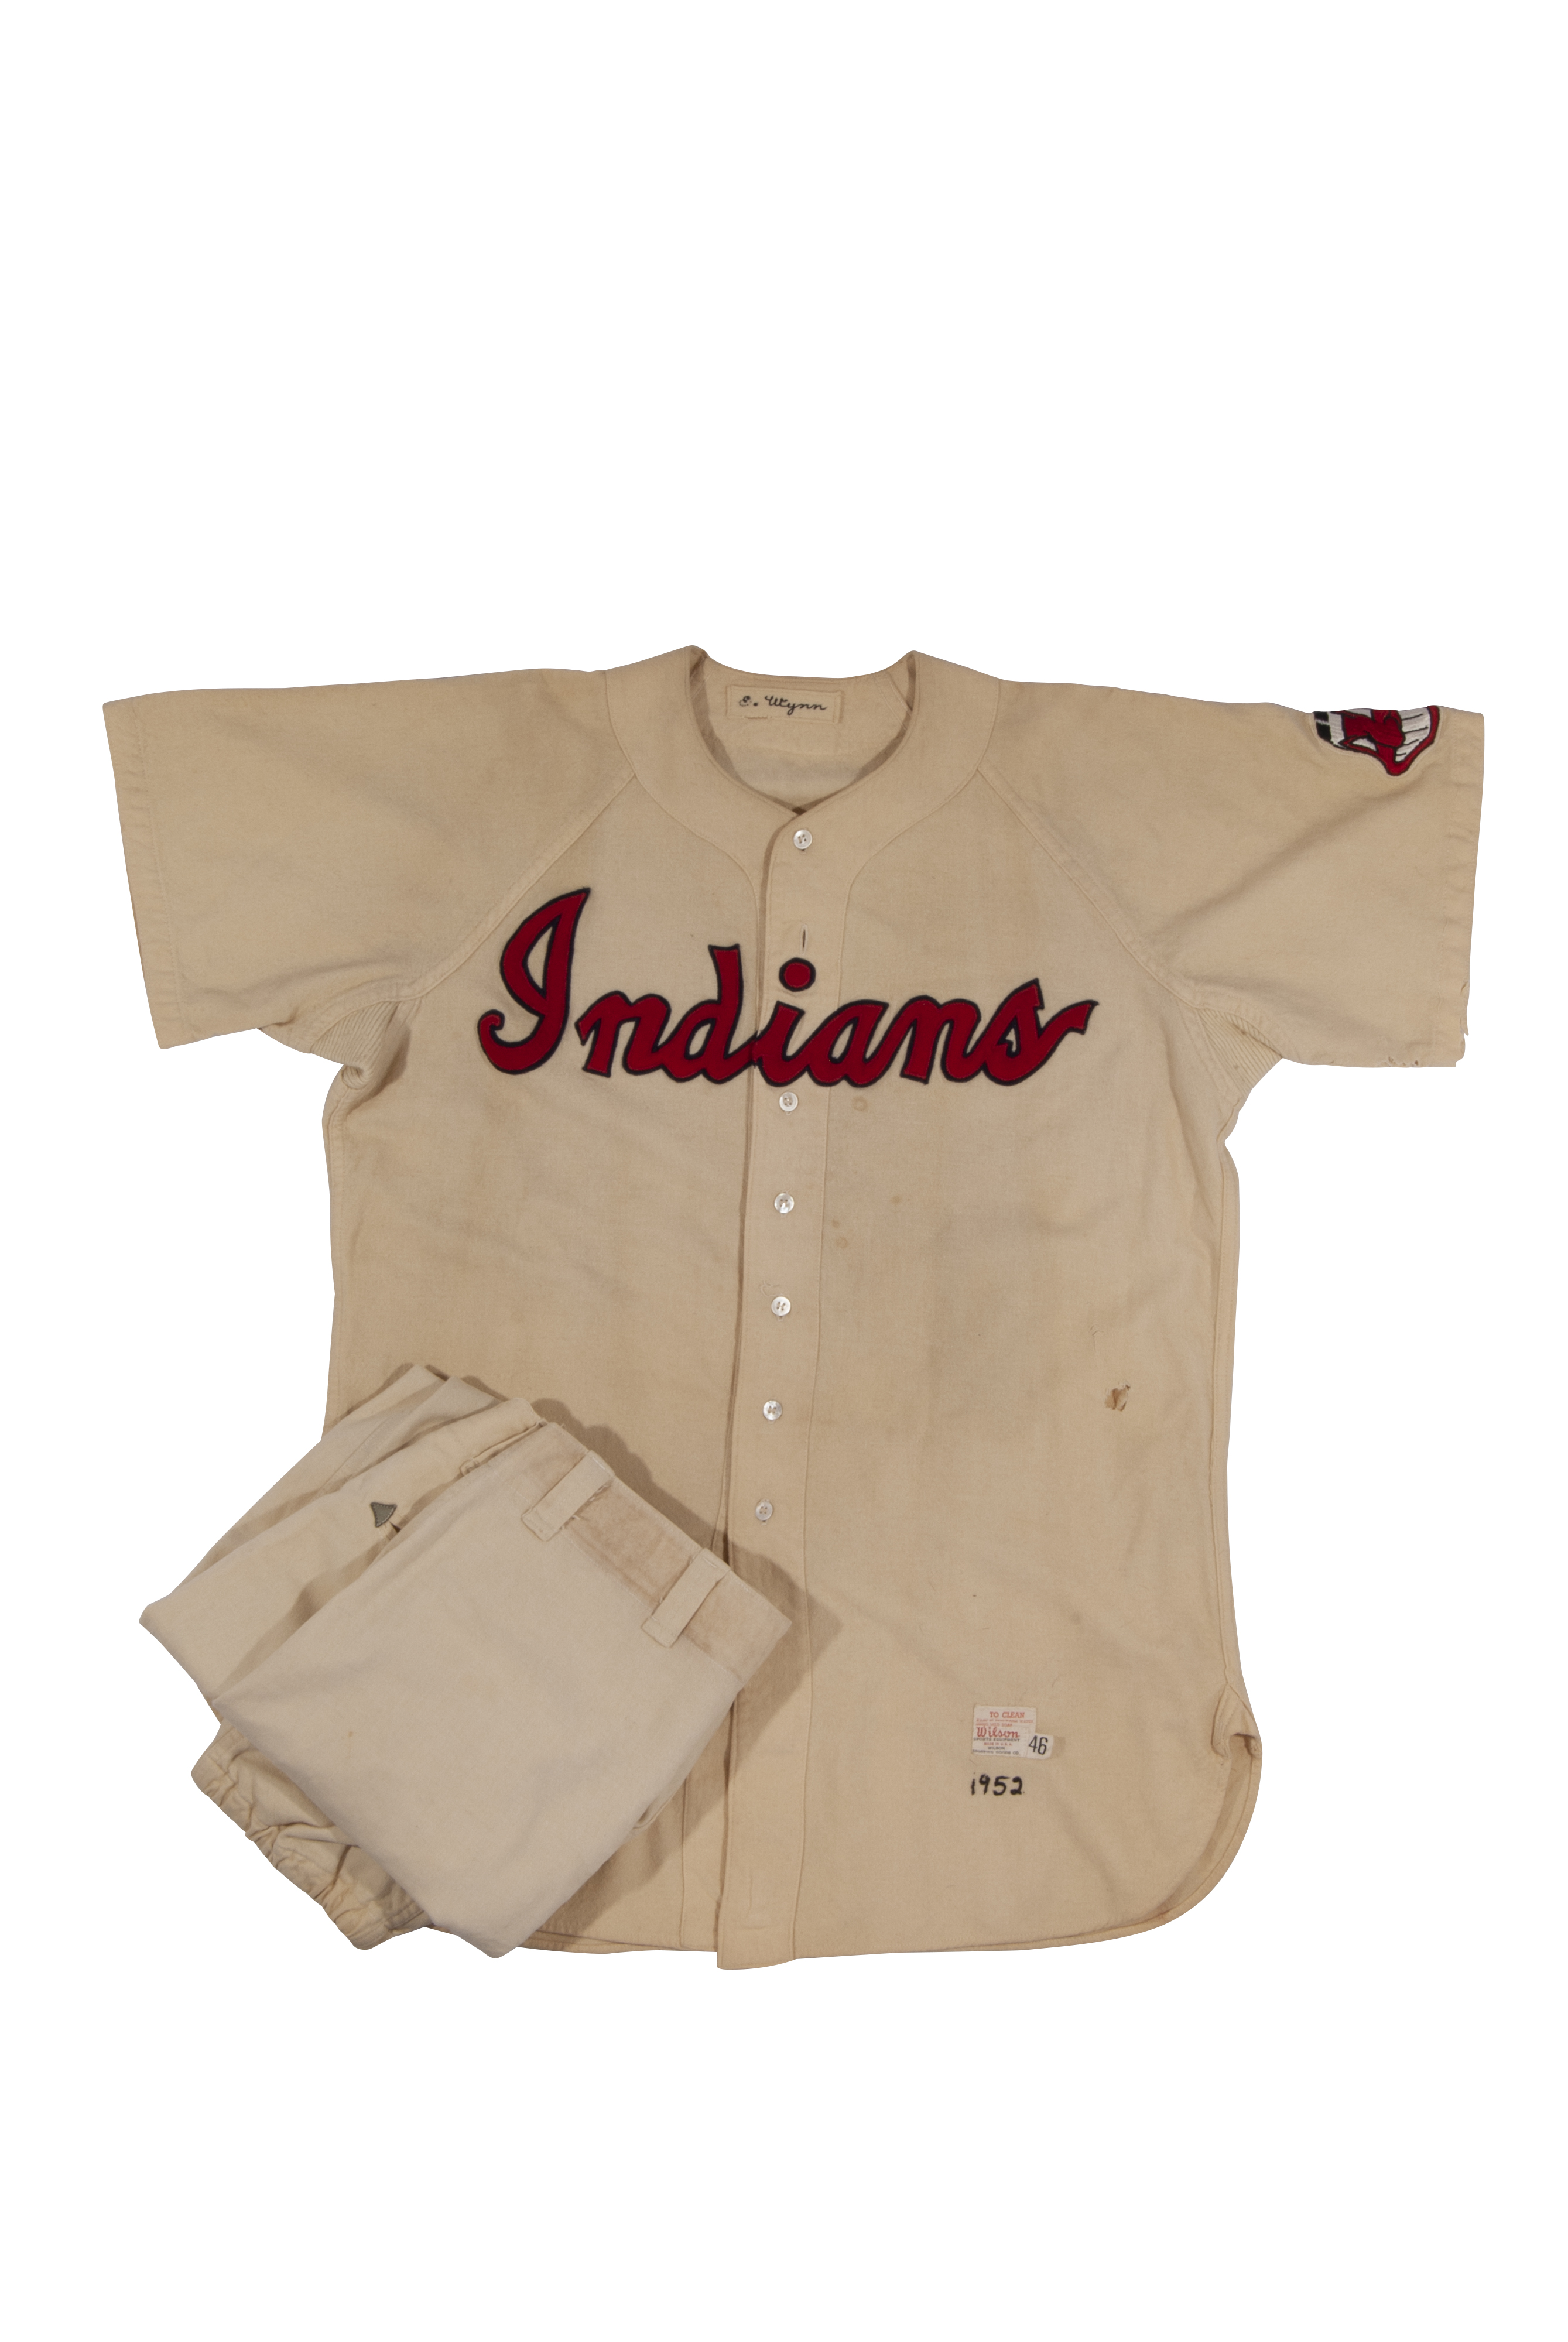 Bob Feller 1948 Cleveland Indians Cooperstown Throwback MLB Jersey